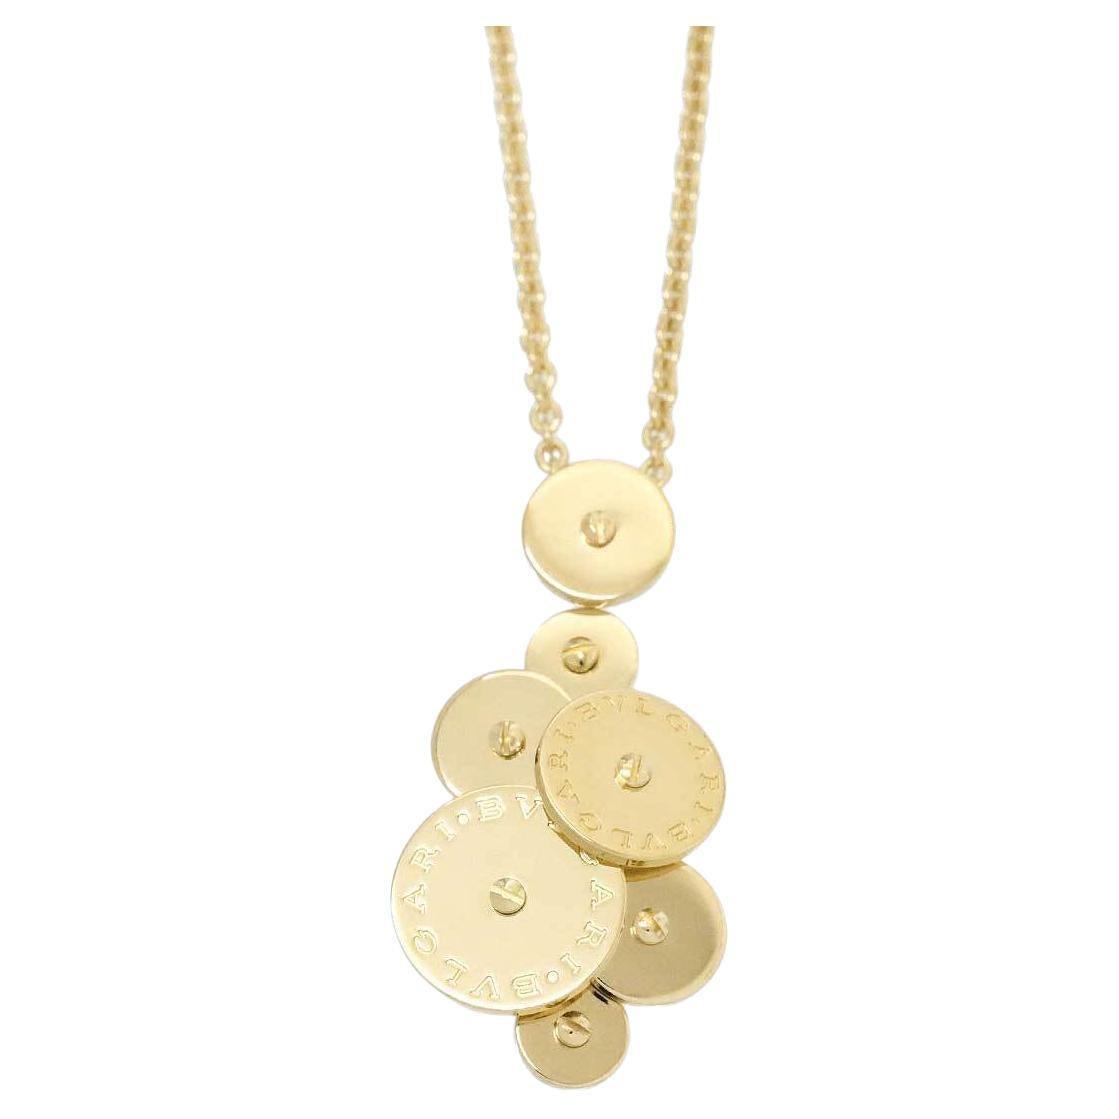 Bvlgari Cicladi Collection Small Pendant Necklace in 18k Yellow Gold